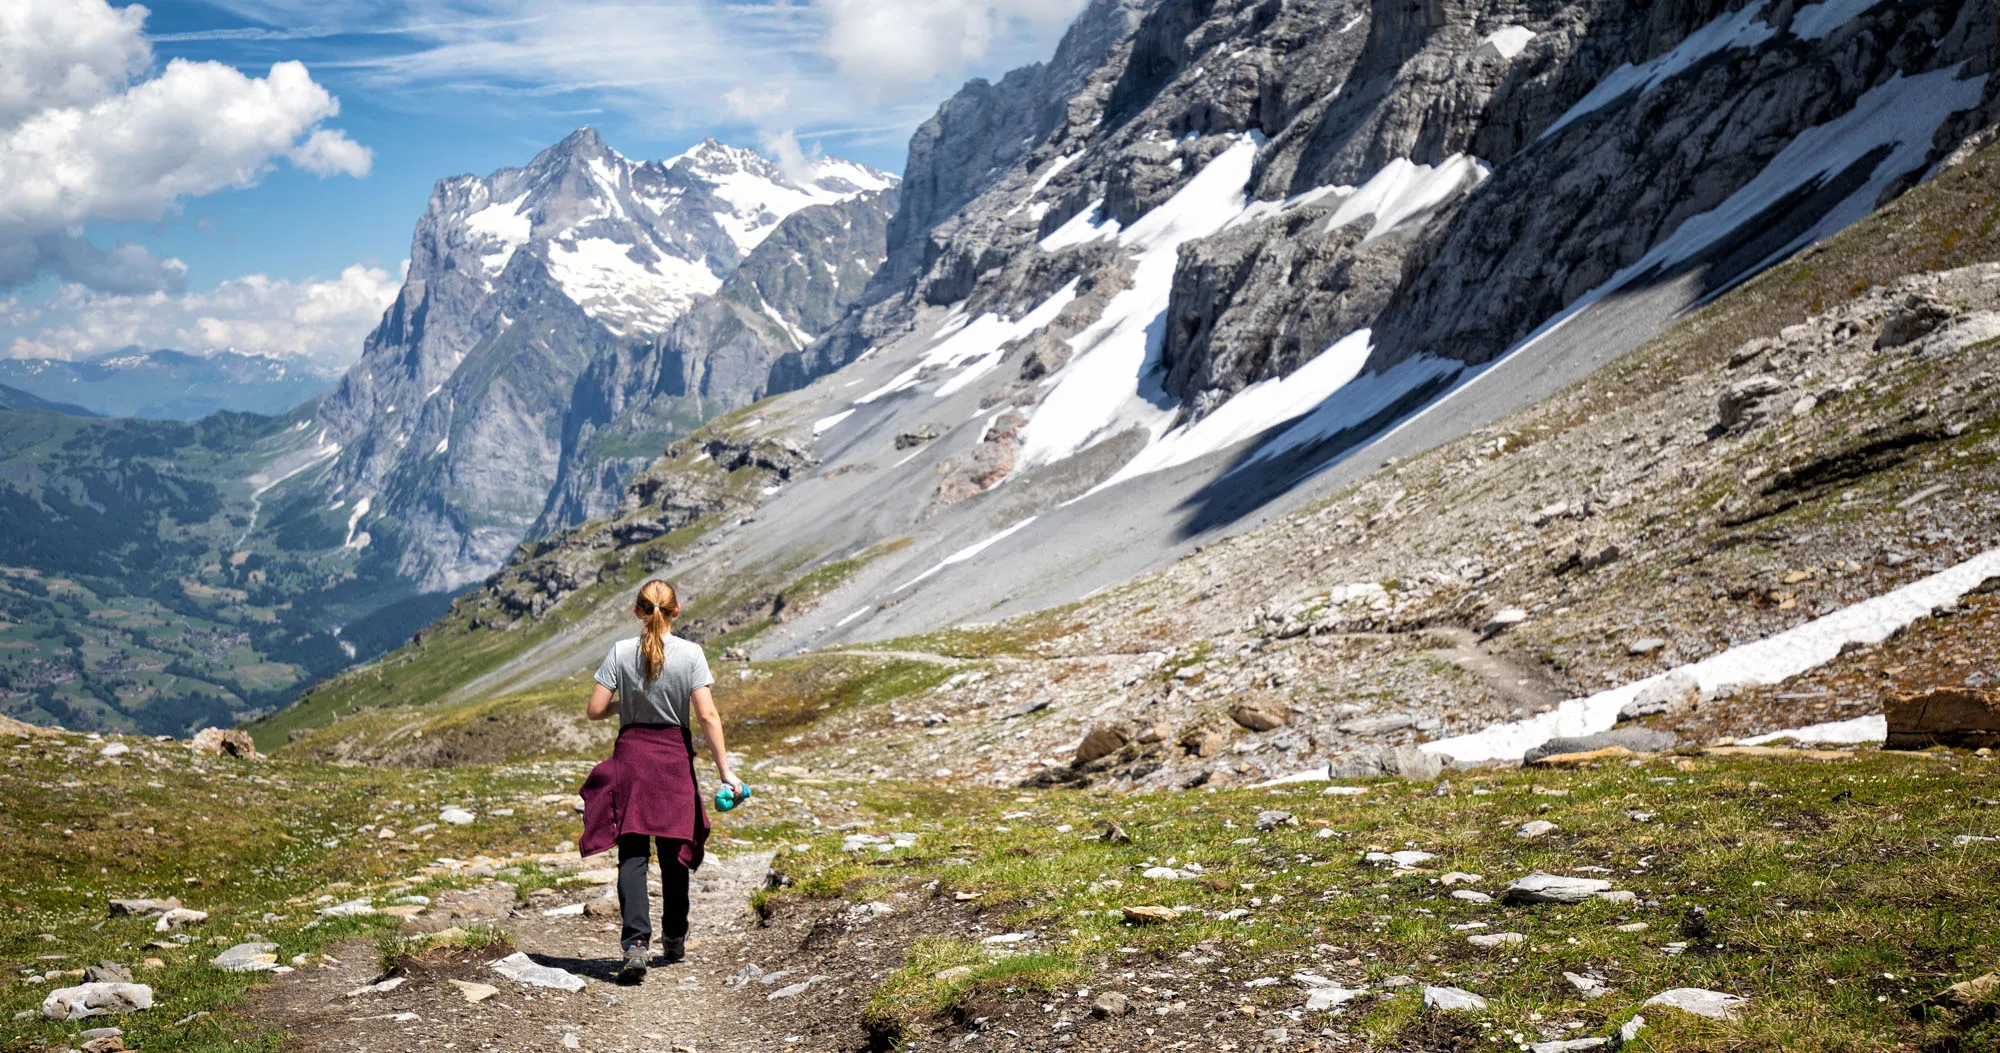 Featured image for “How to Hike the Eiger Trail in the Bernese Oberland, Switzerland”